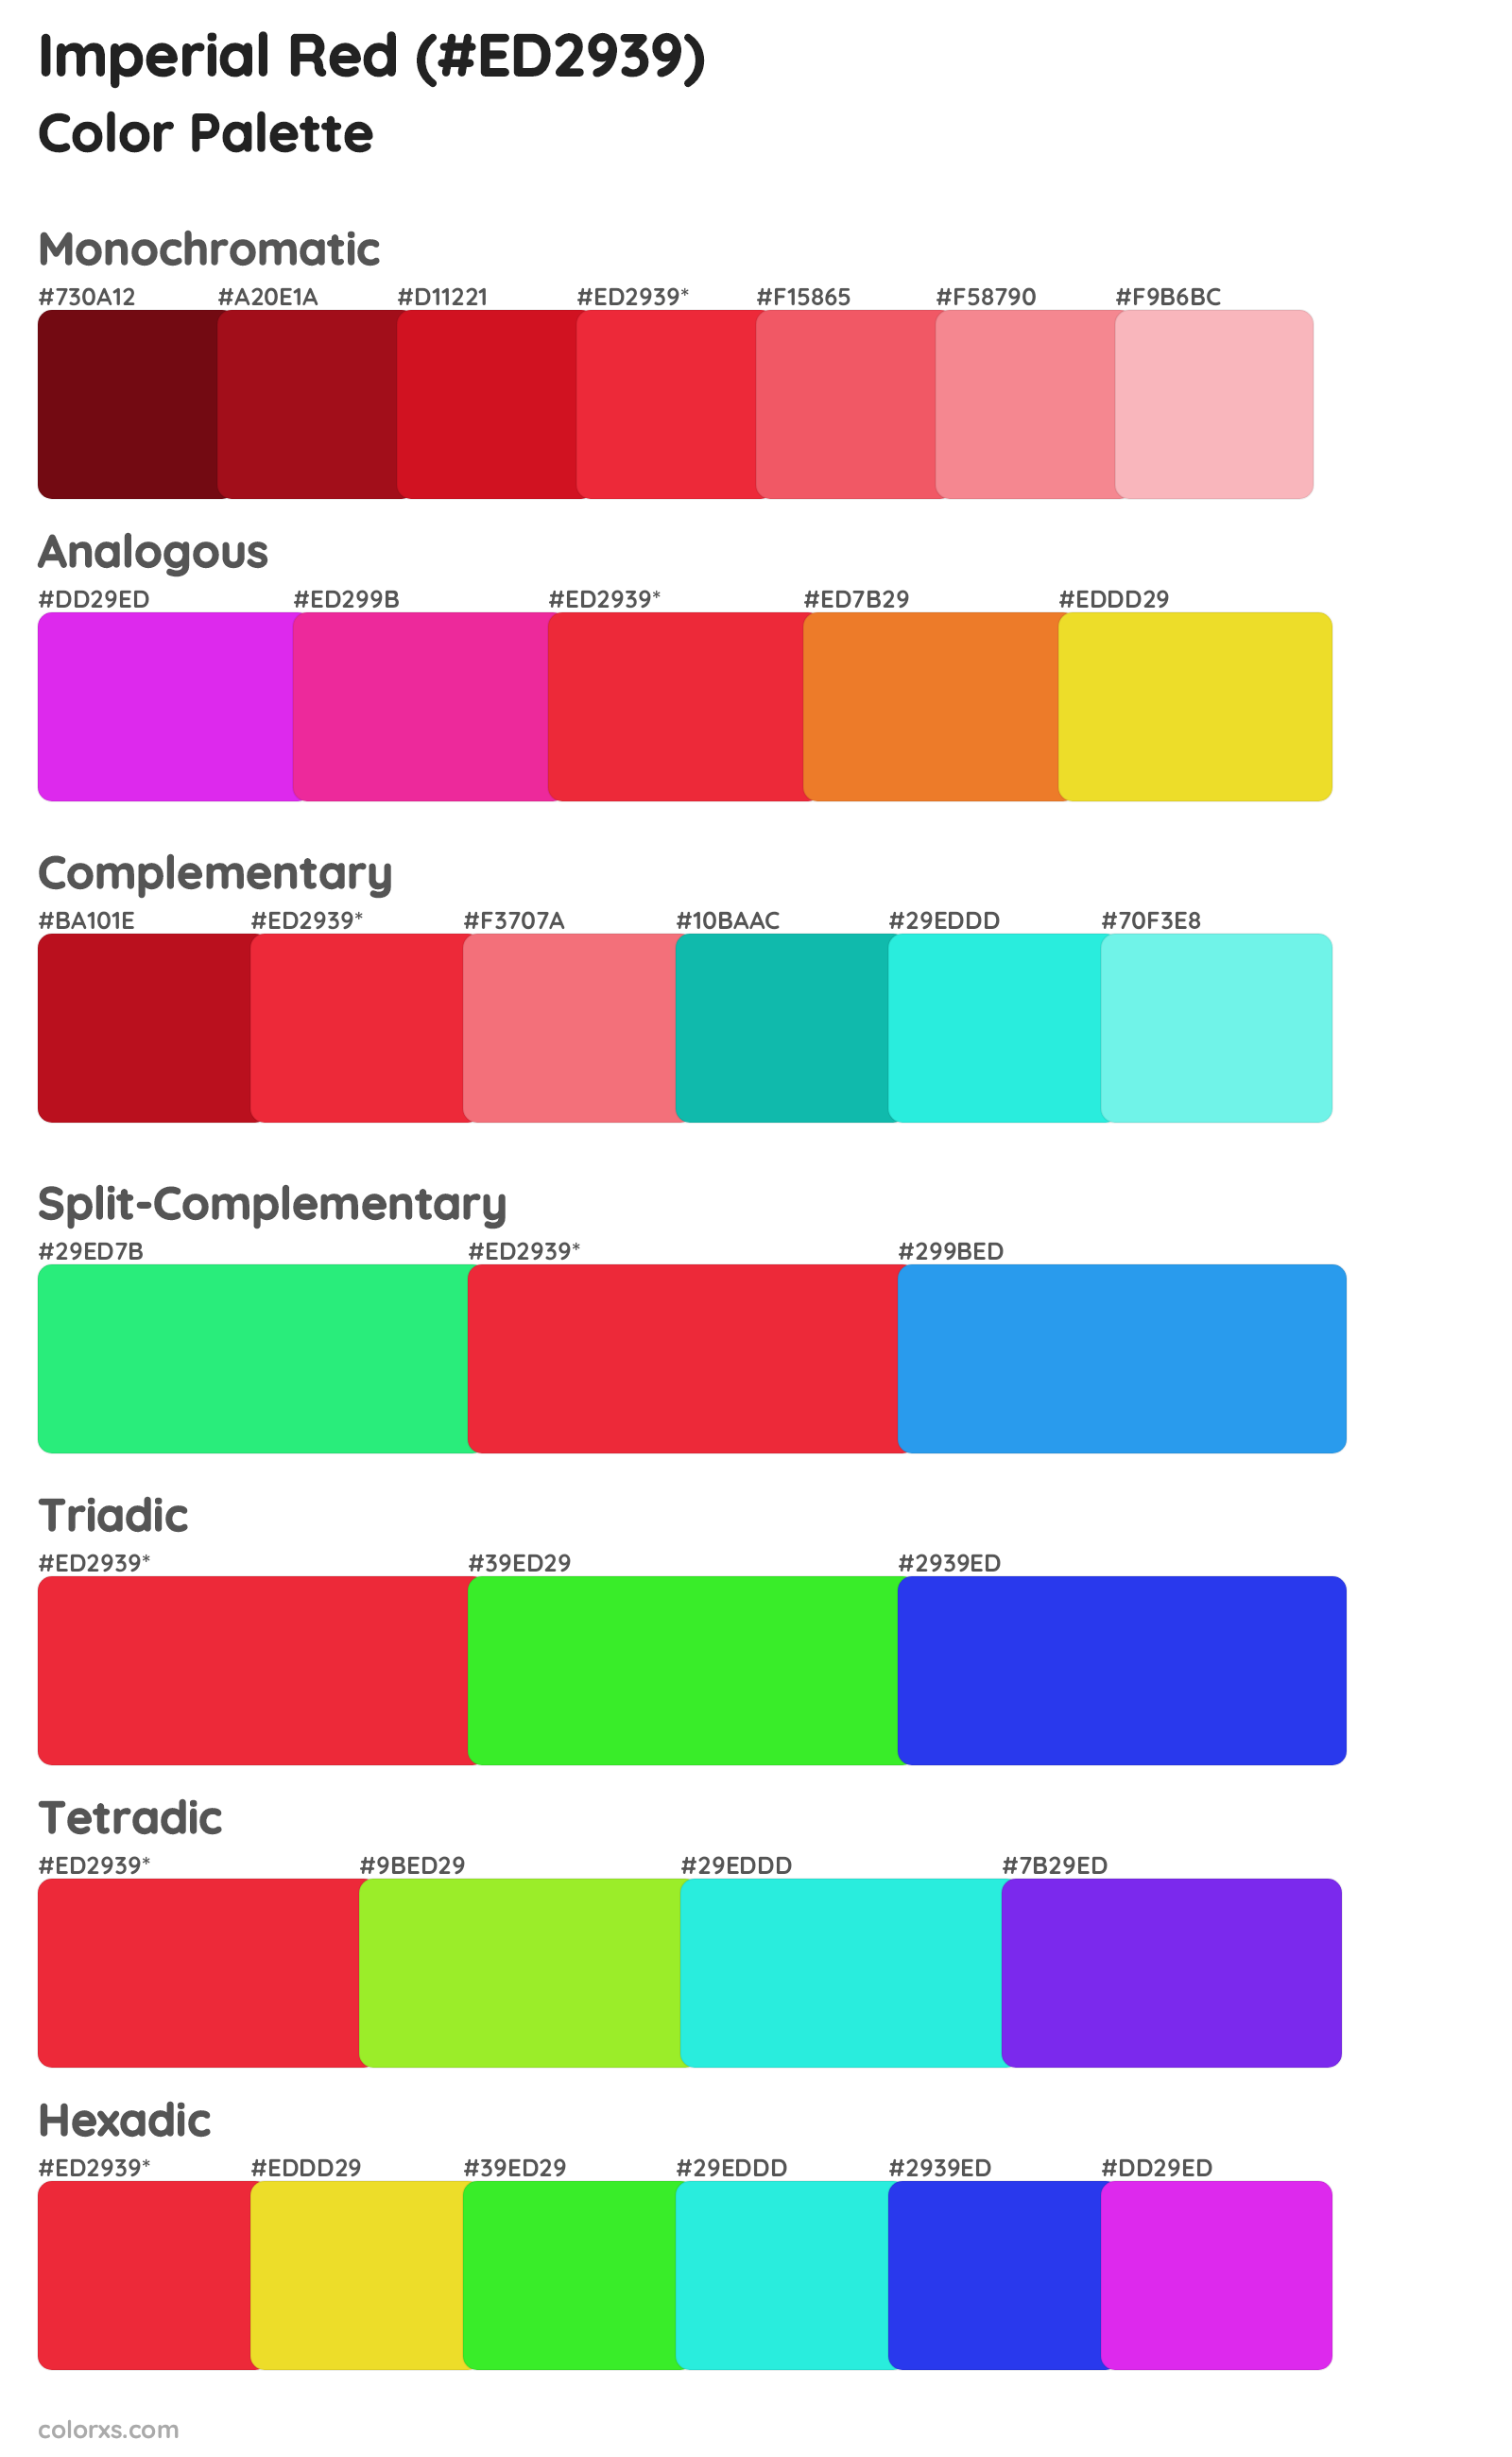 Imperial Red Color Scheme Palettes